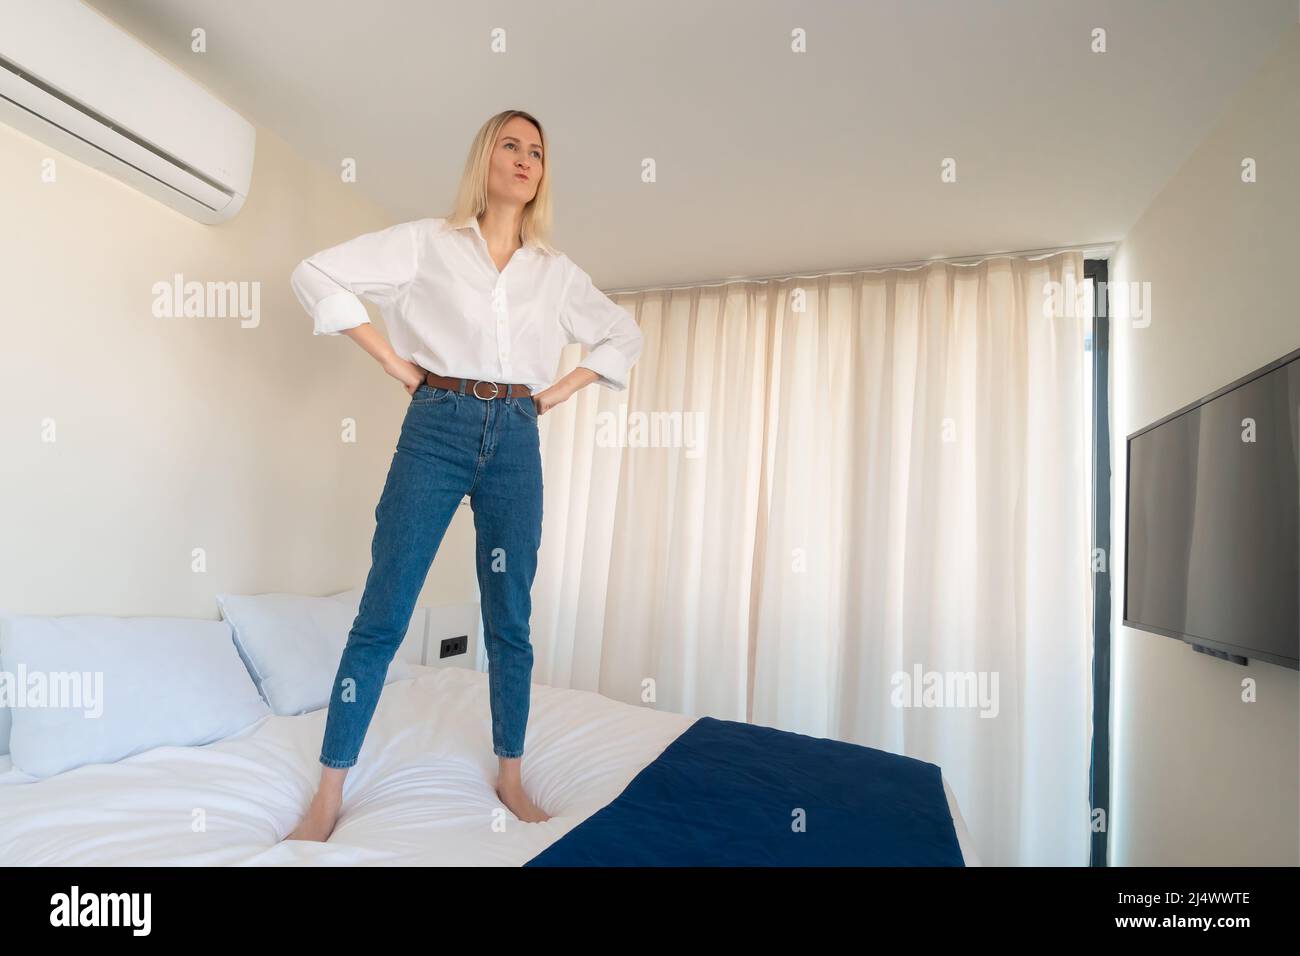 Moody, discontented young blonde woman with puffed cheeks in a white shirt, blue jeans is standing on the bed with her hands on her belt. Stock Photo